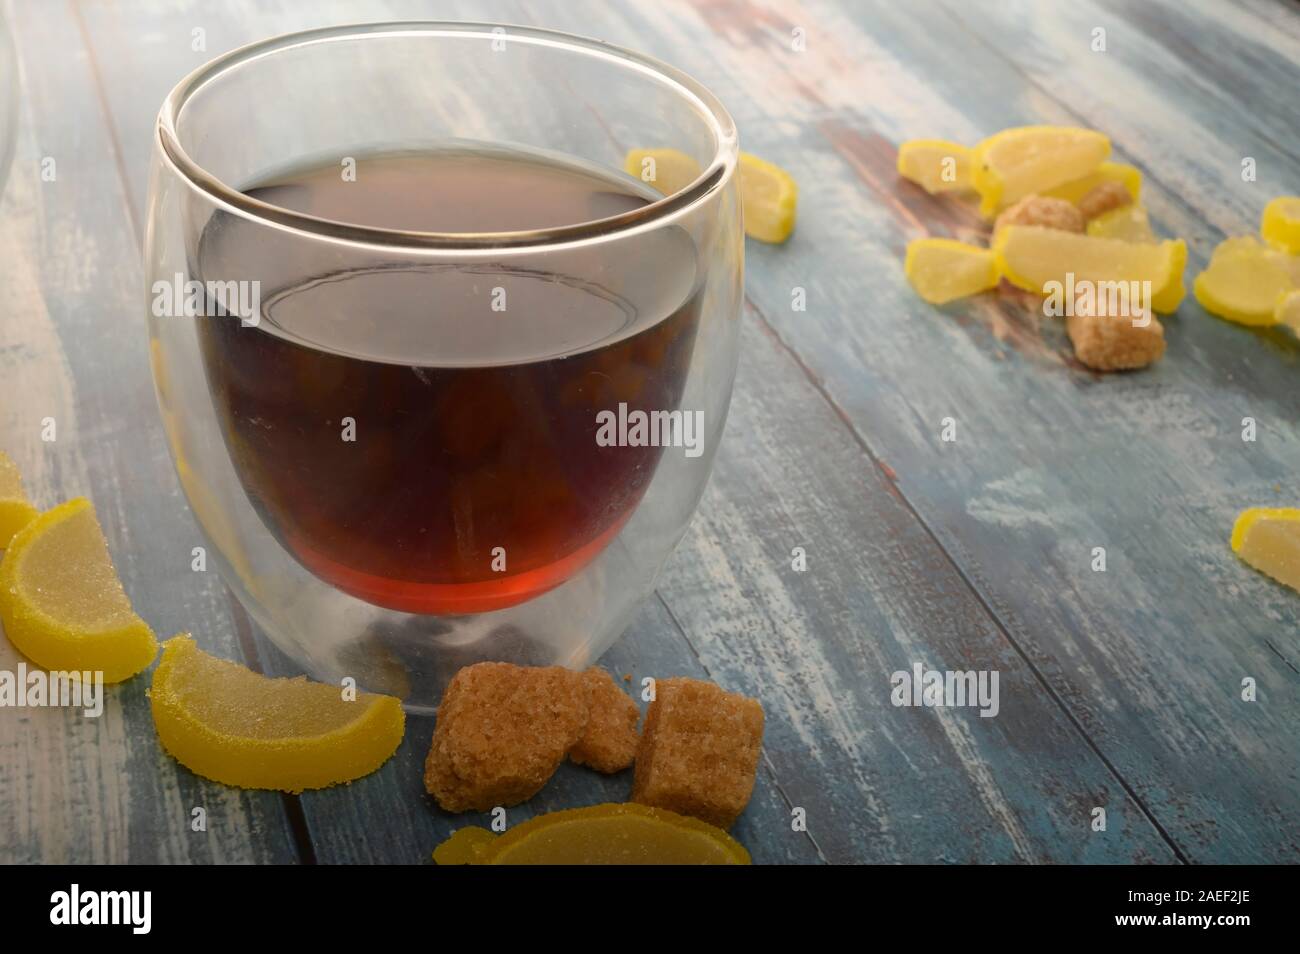 Marmalade lemon slices, pieces of brown sugar and a glass of black tea on a wooden background. Sweet dessert. Close up Stock Photo